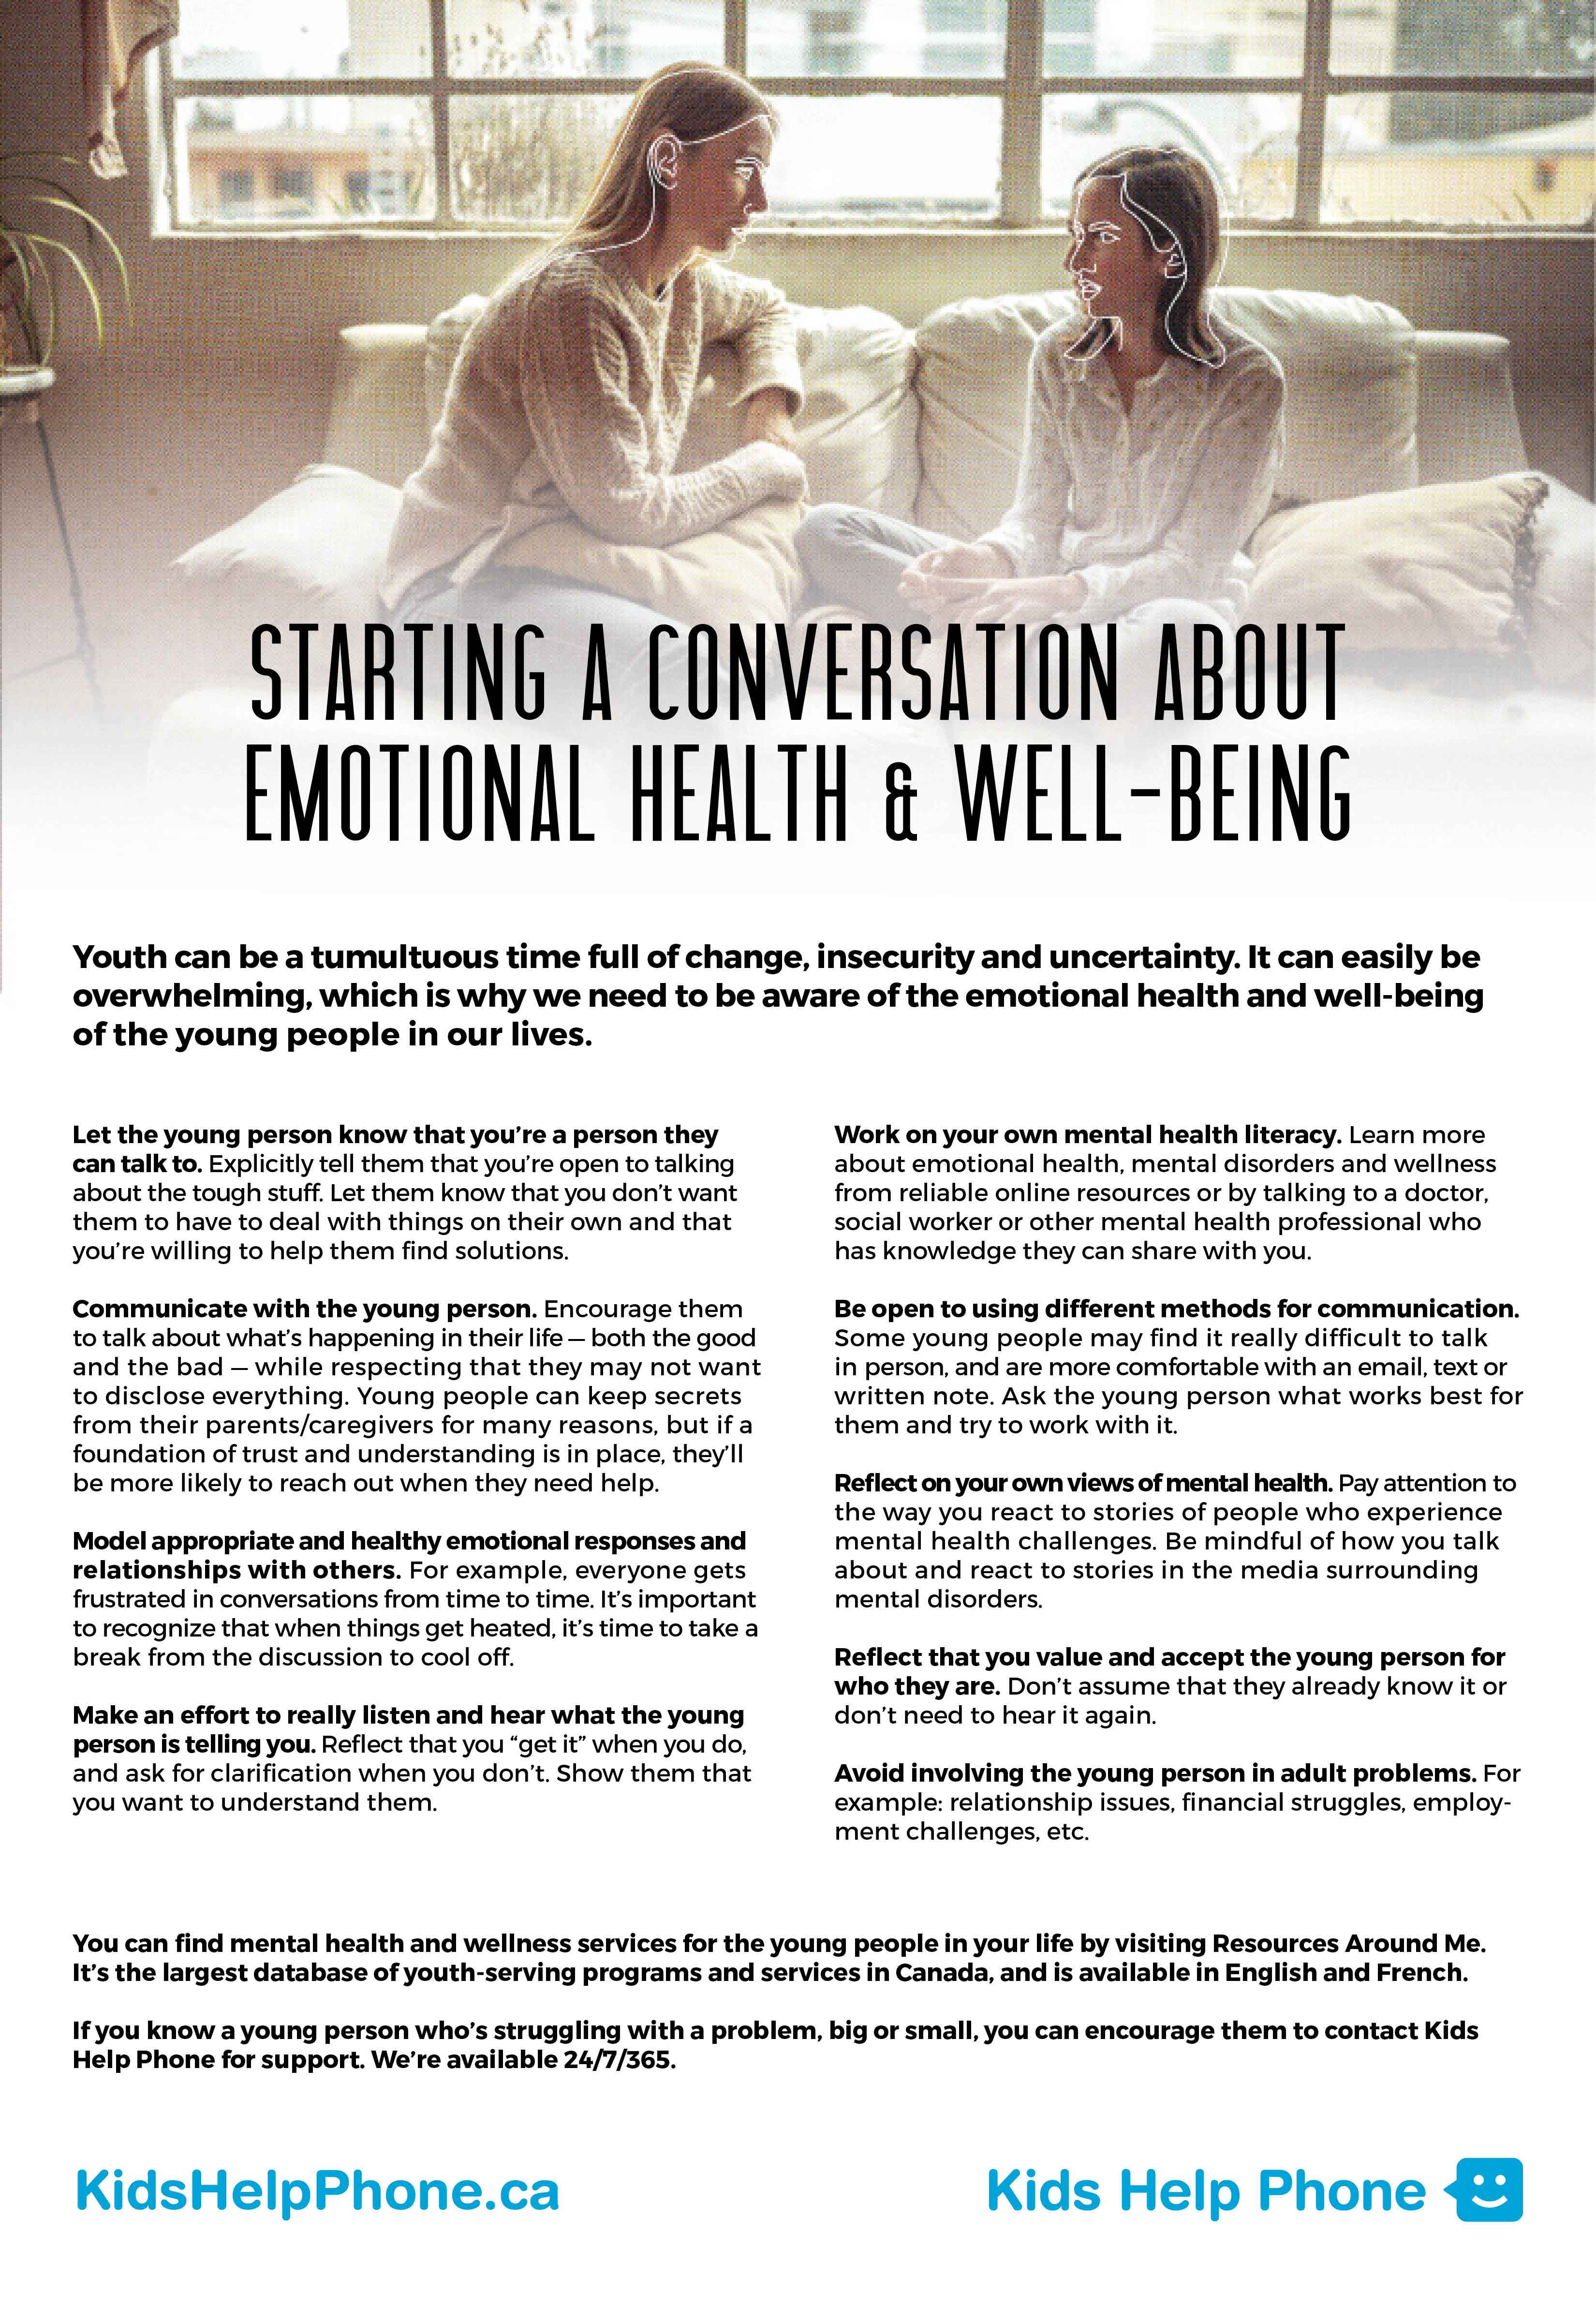 Starting a conversation about emotional health & well